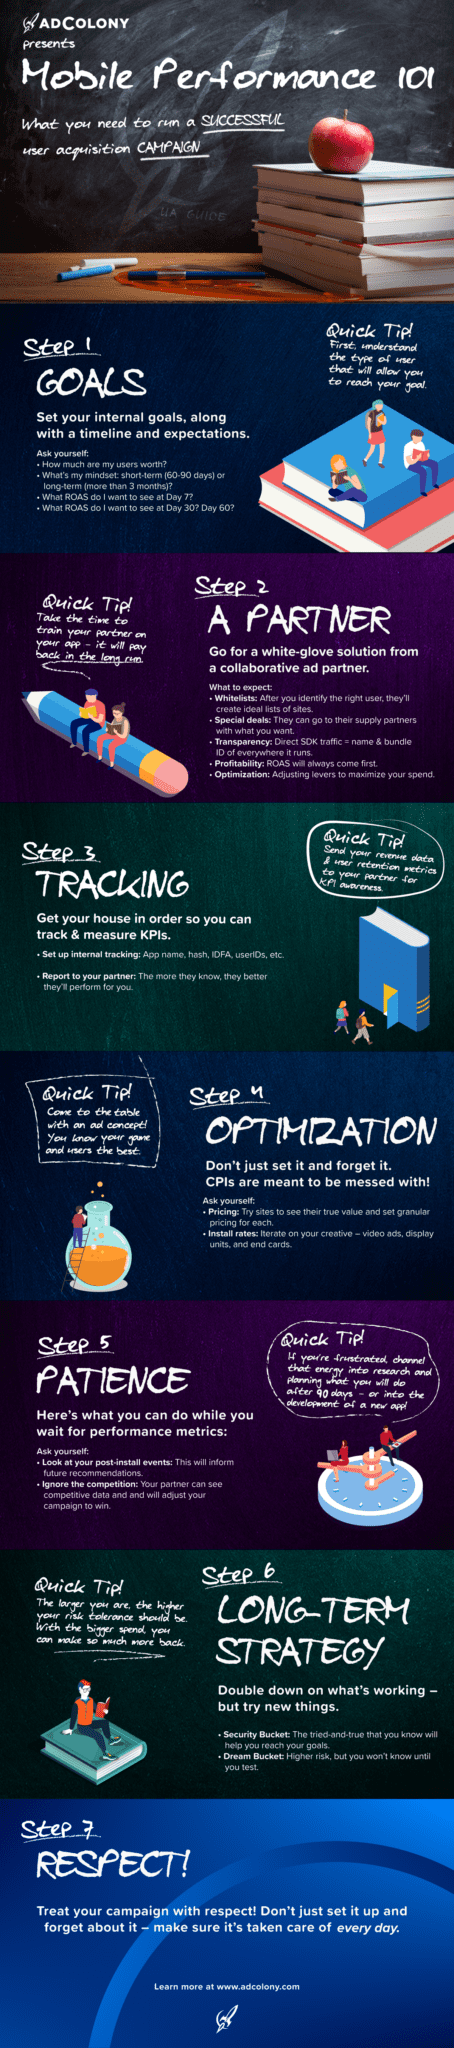 Mobile Performance 101 Infographic